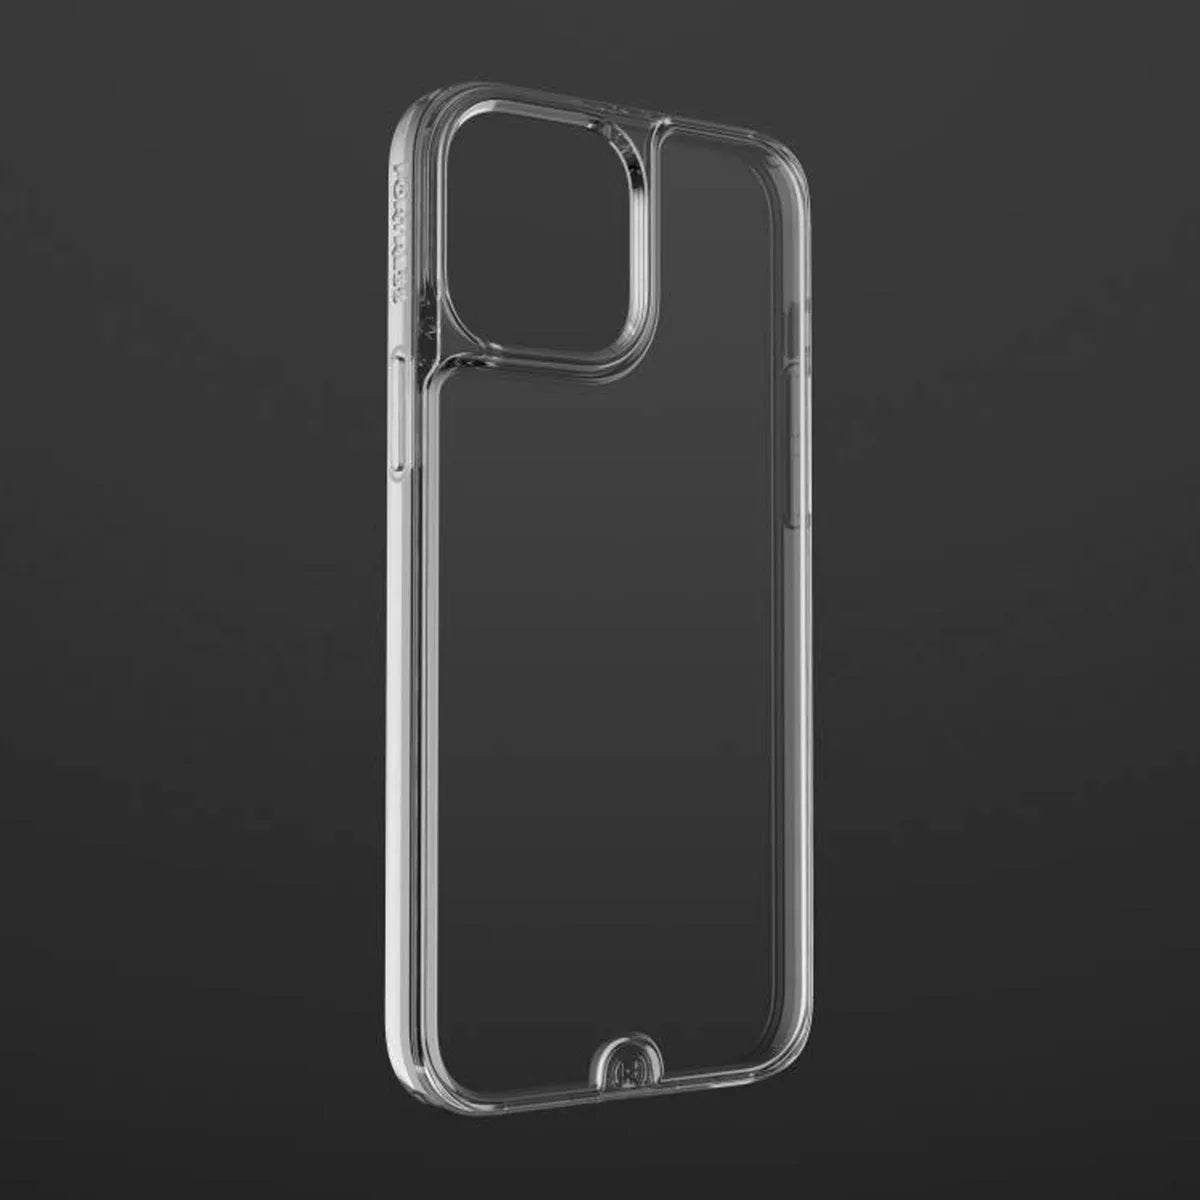 Fortress Fortress Fortress Infinite Glass Case for iPhone 13 Pro Max  Infinite Glass 